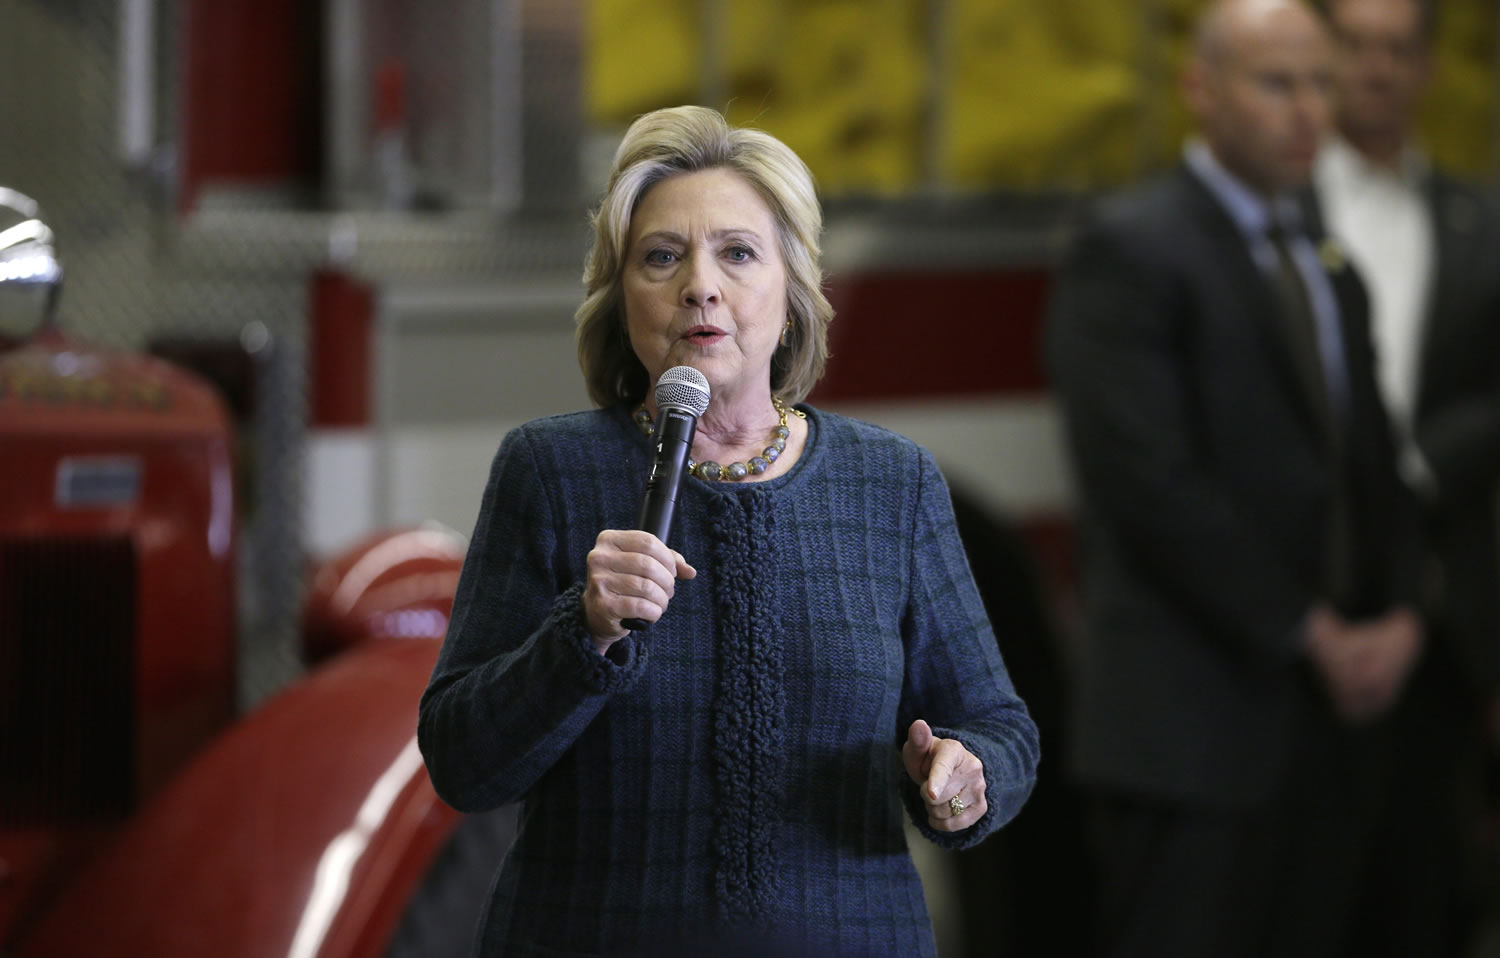 Democratic presidential candidate Hillary Clinton speaks during a campaign stop at the Osage Public Safety Center, Tuesday, Jan. 5, 2016, in Osage, Iowa.